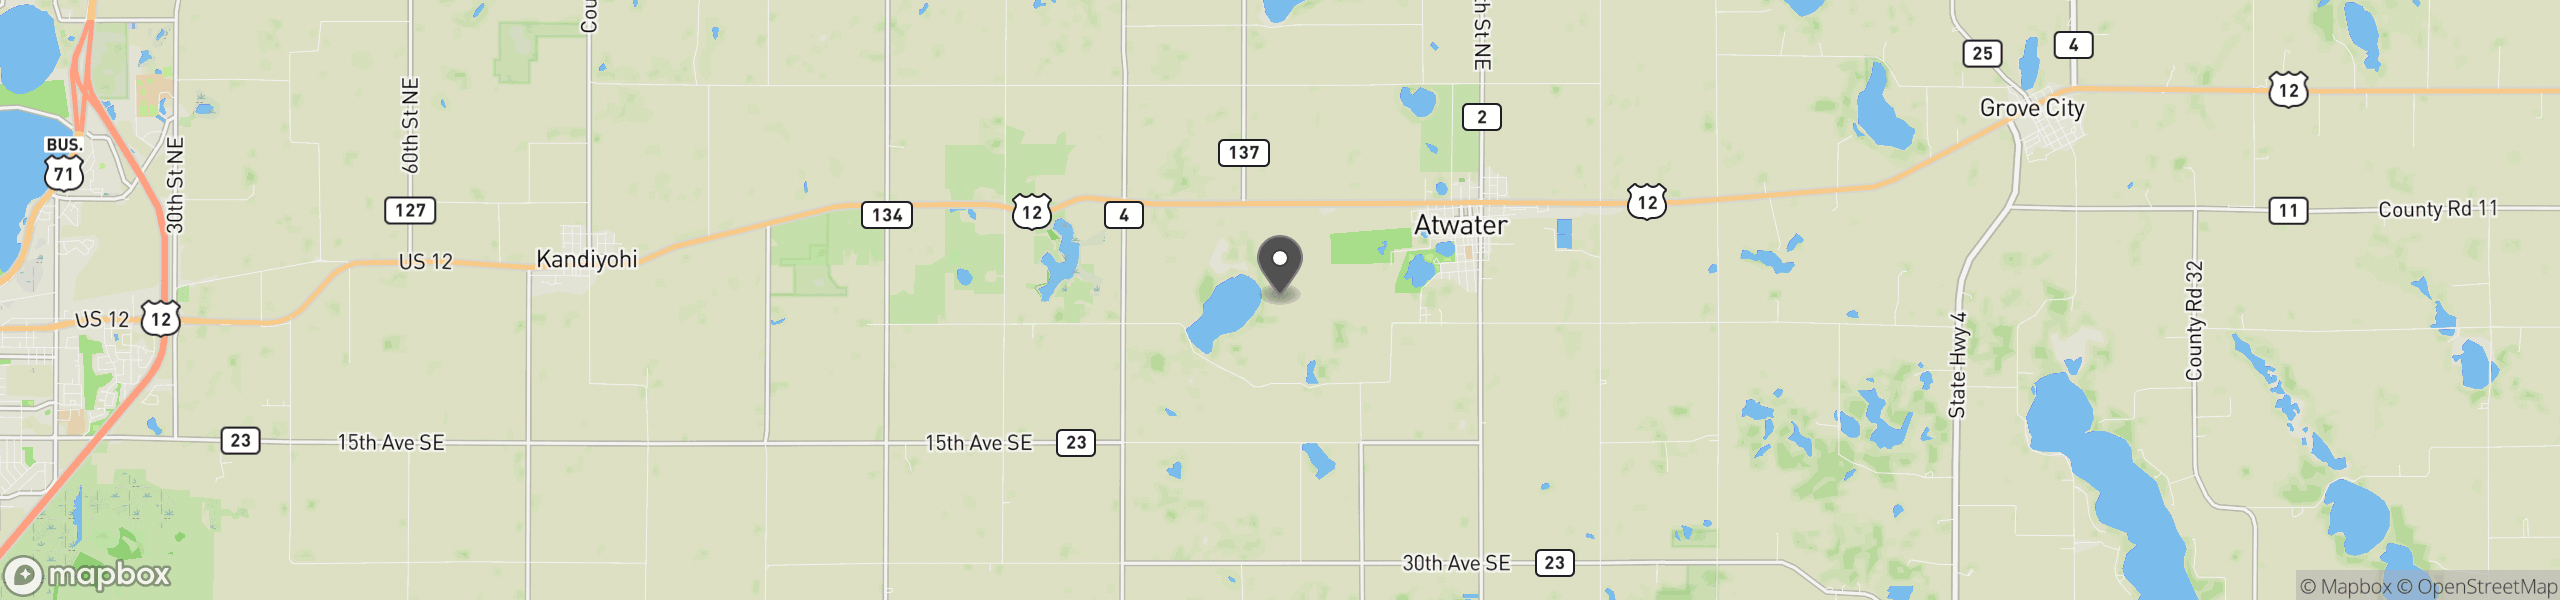 Atwater, MN 56209